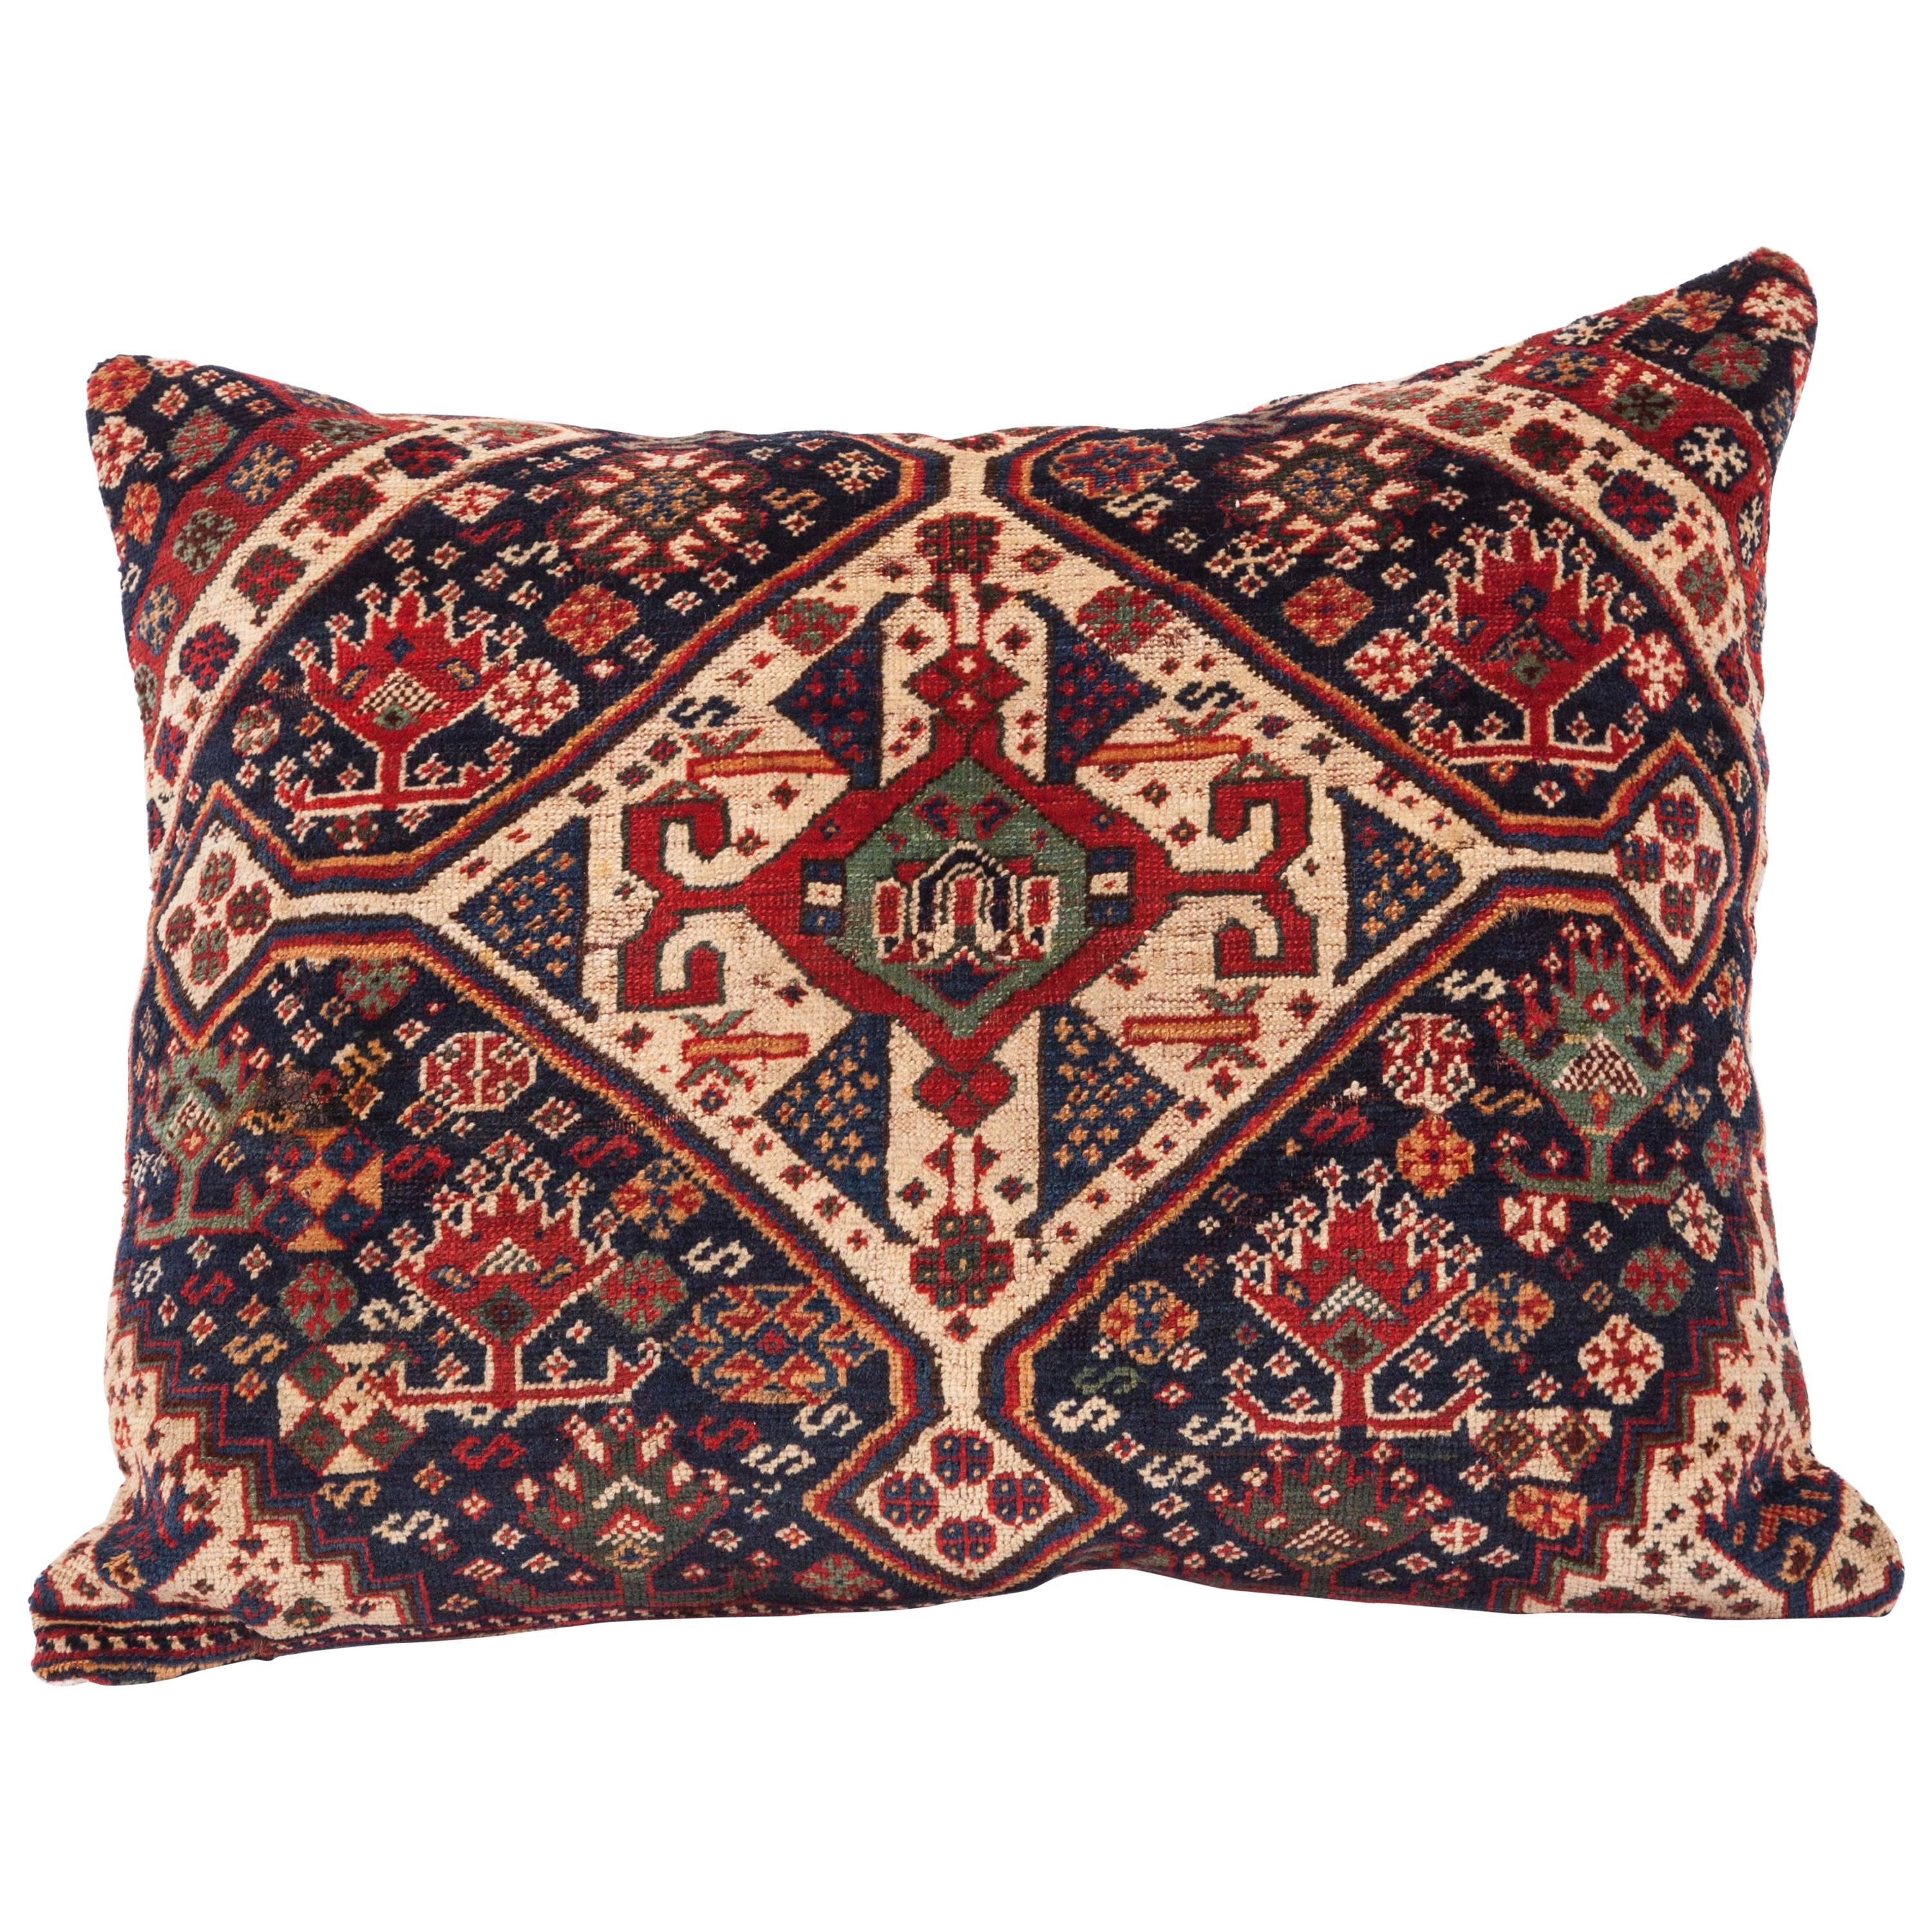 Antique Pillow Case Fashioned from an 19th Century Kashgai Rug Fragment